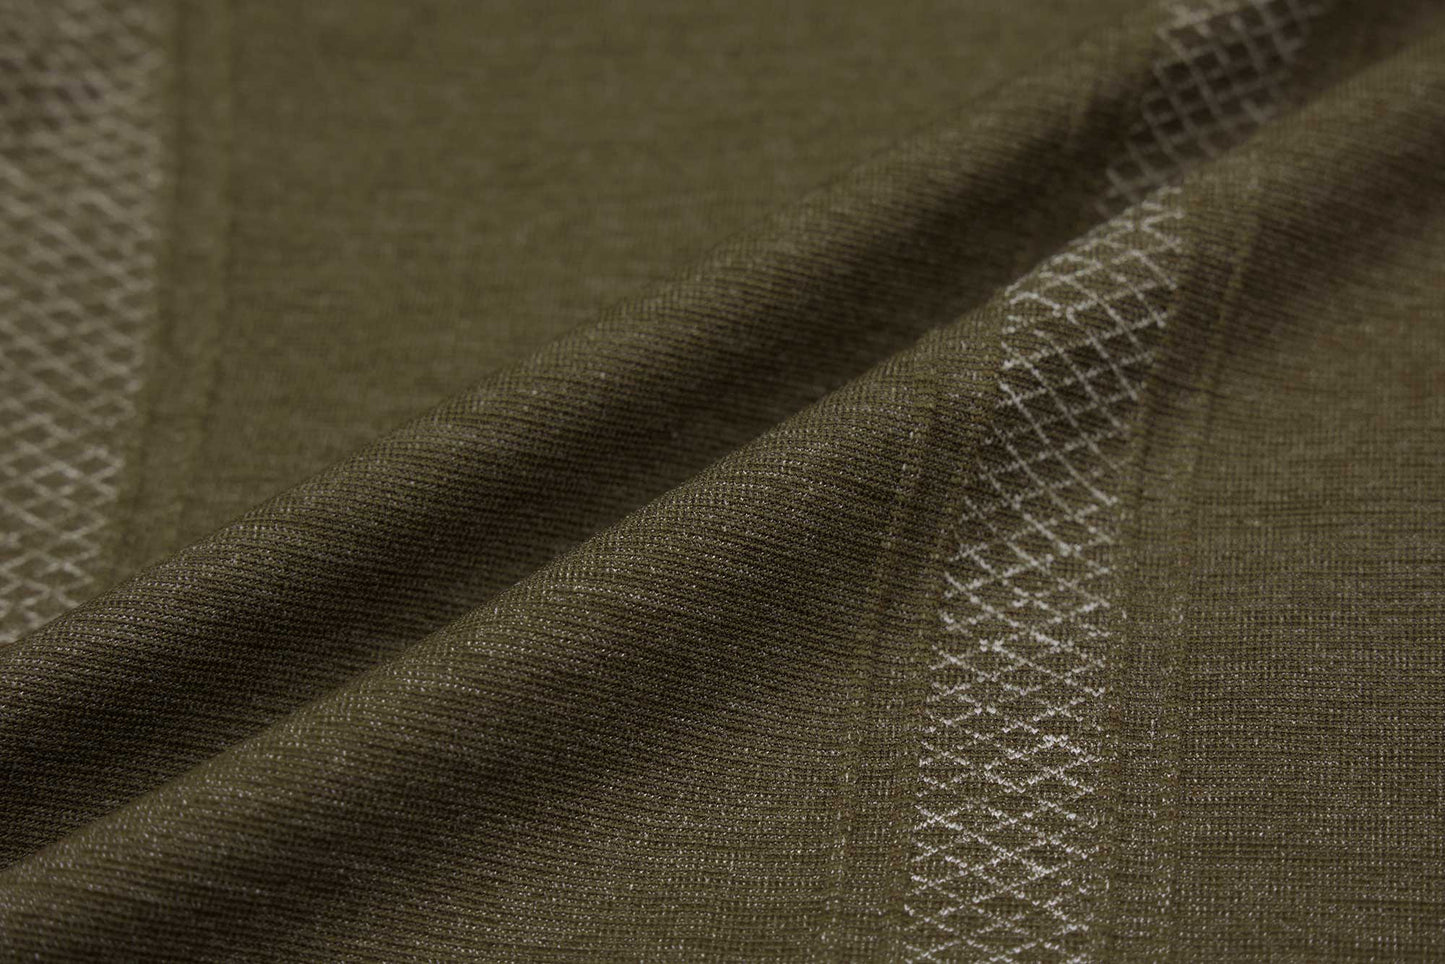 Fabric details of T-Shirt